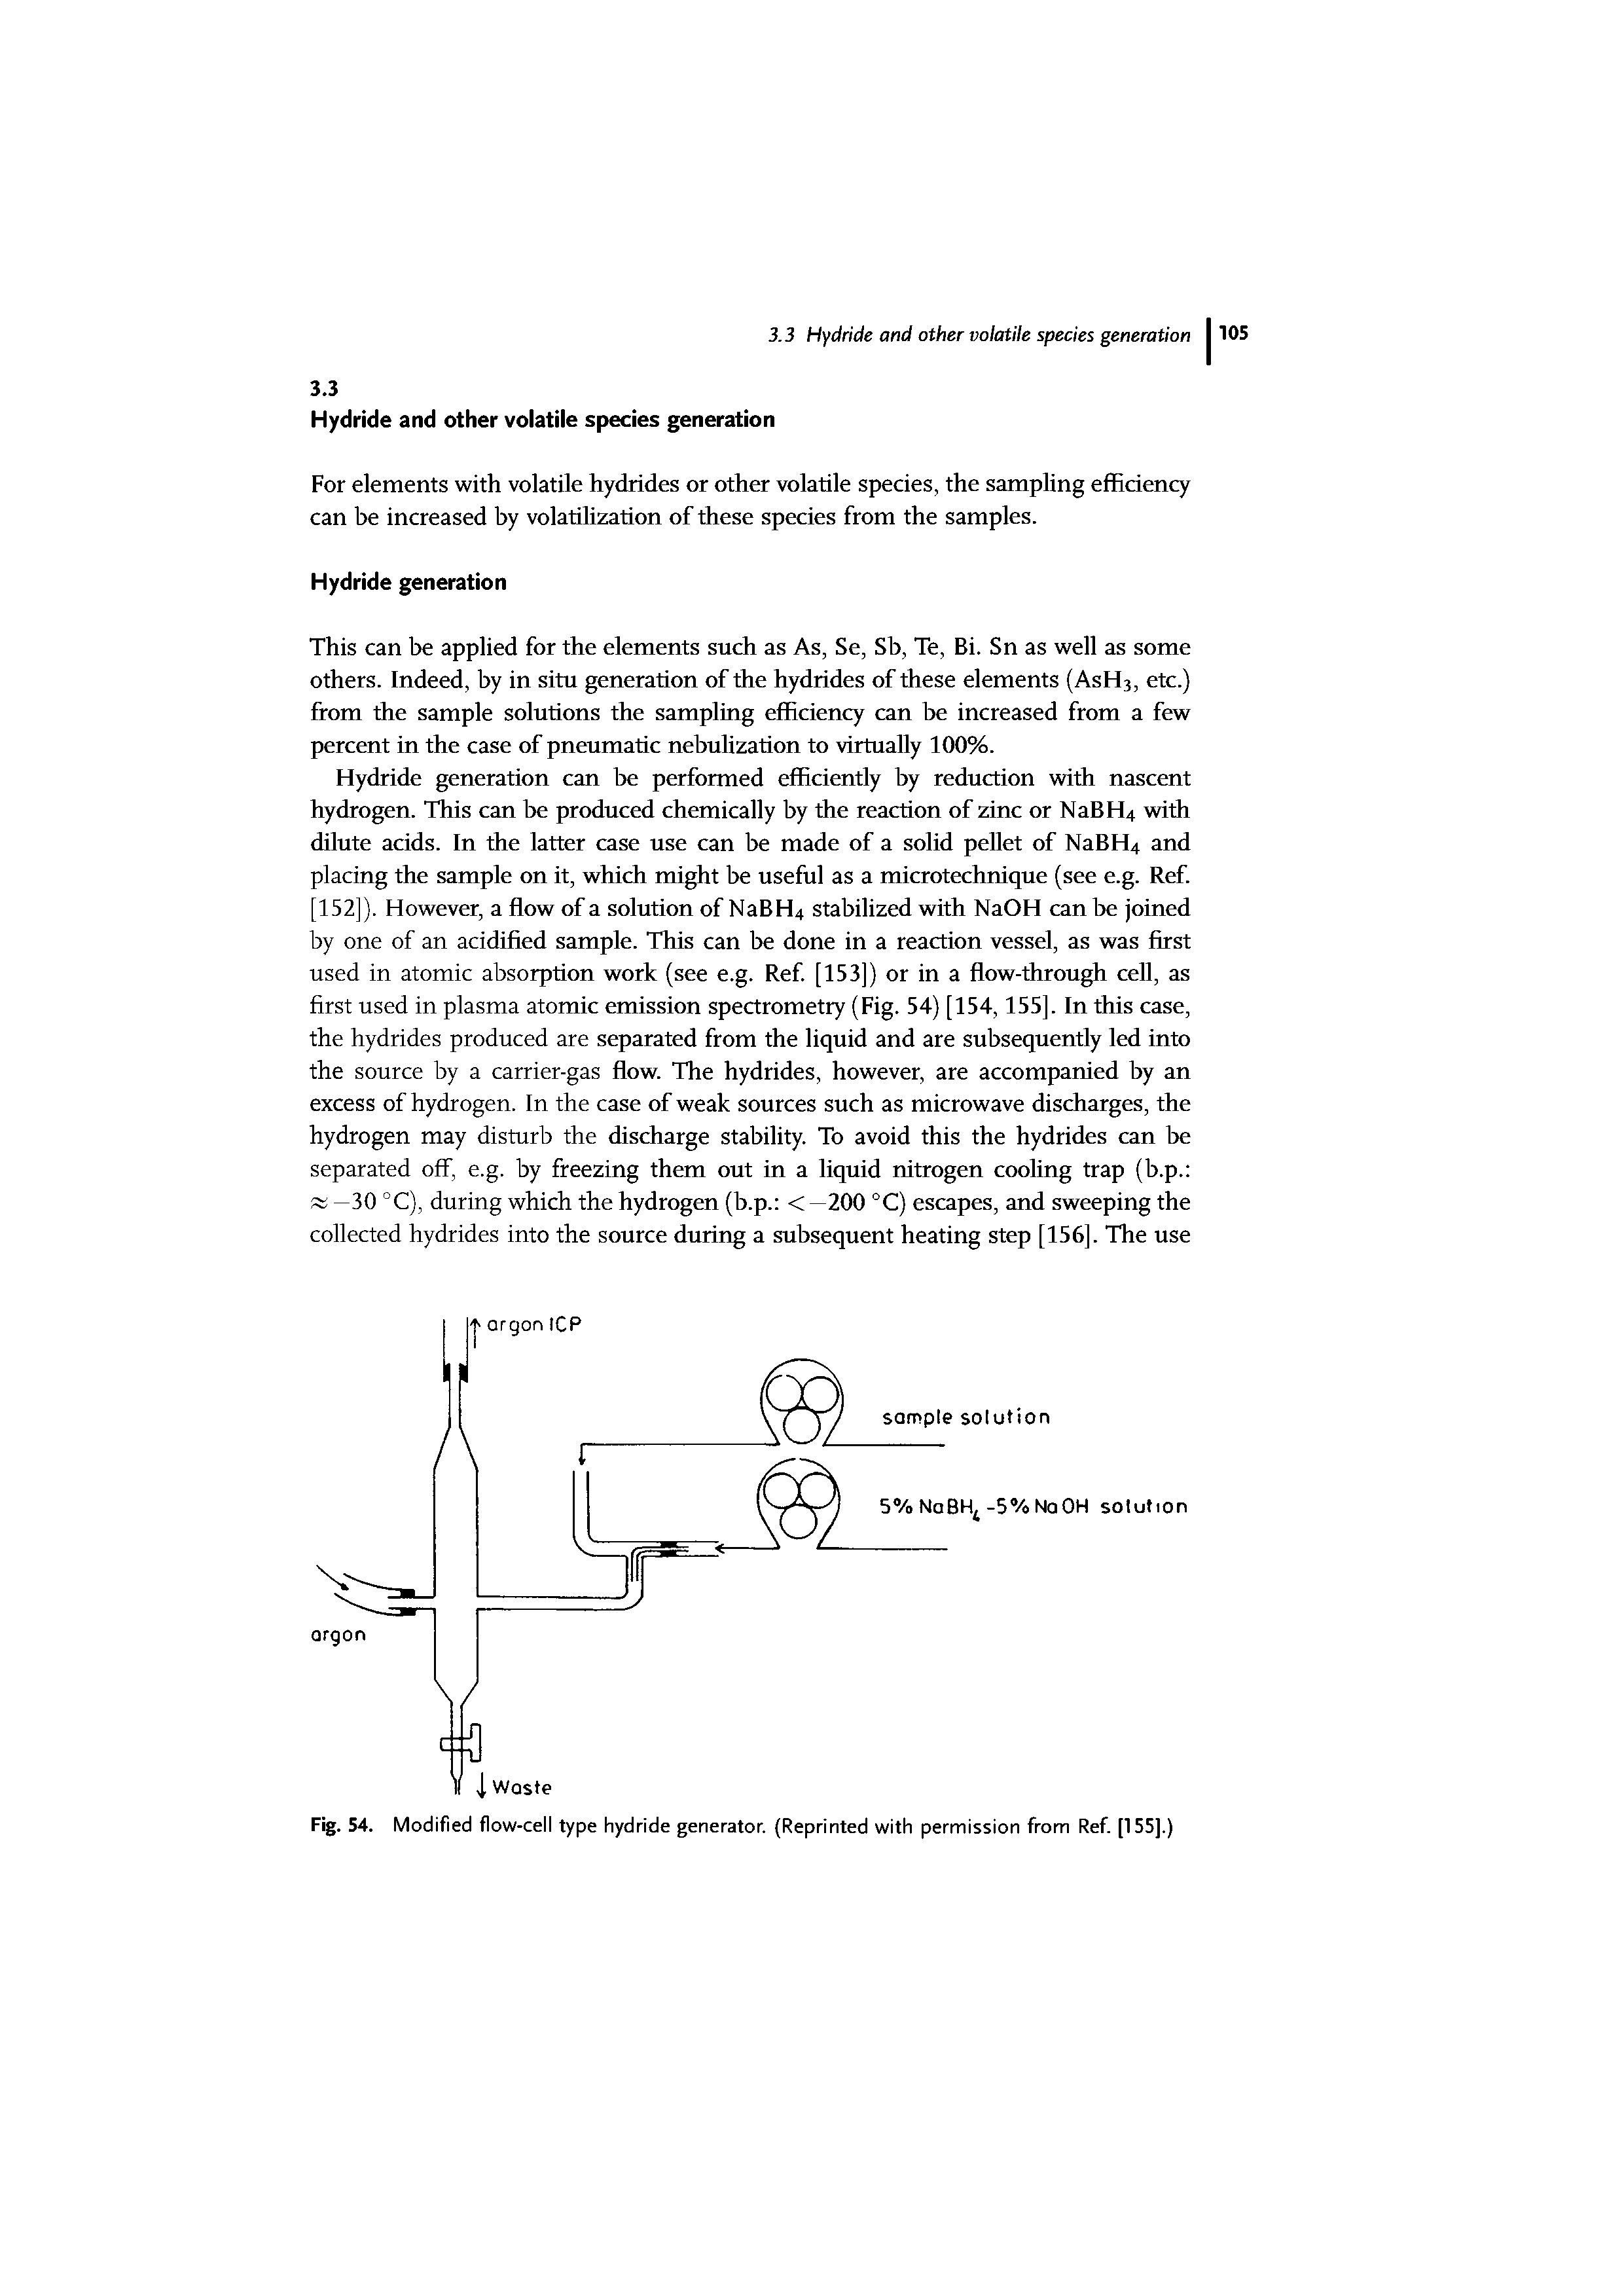 Fig. 54. Modified flow-cell type hydride generator. (Reprinted with permission from Ref. [155].)...